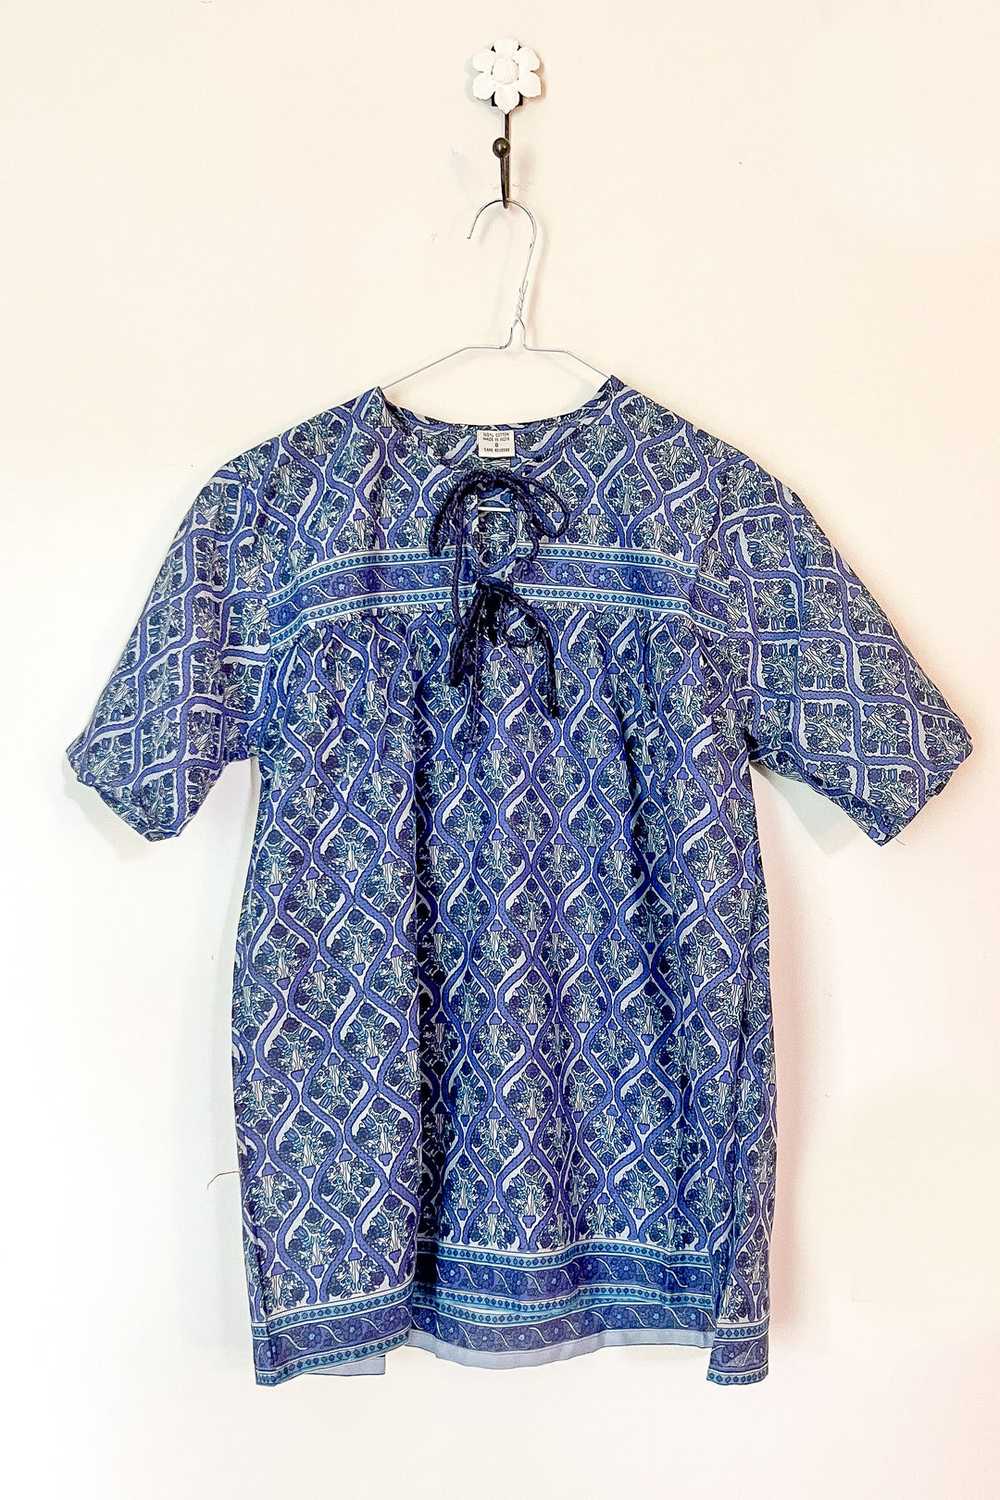 1970s Indian Cotton Blue Paisley Blouse / Small - image 7